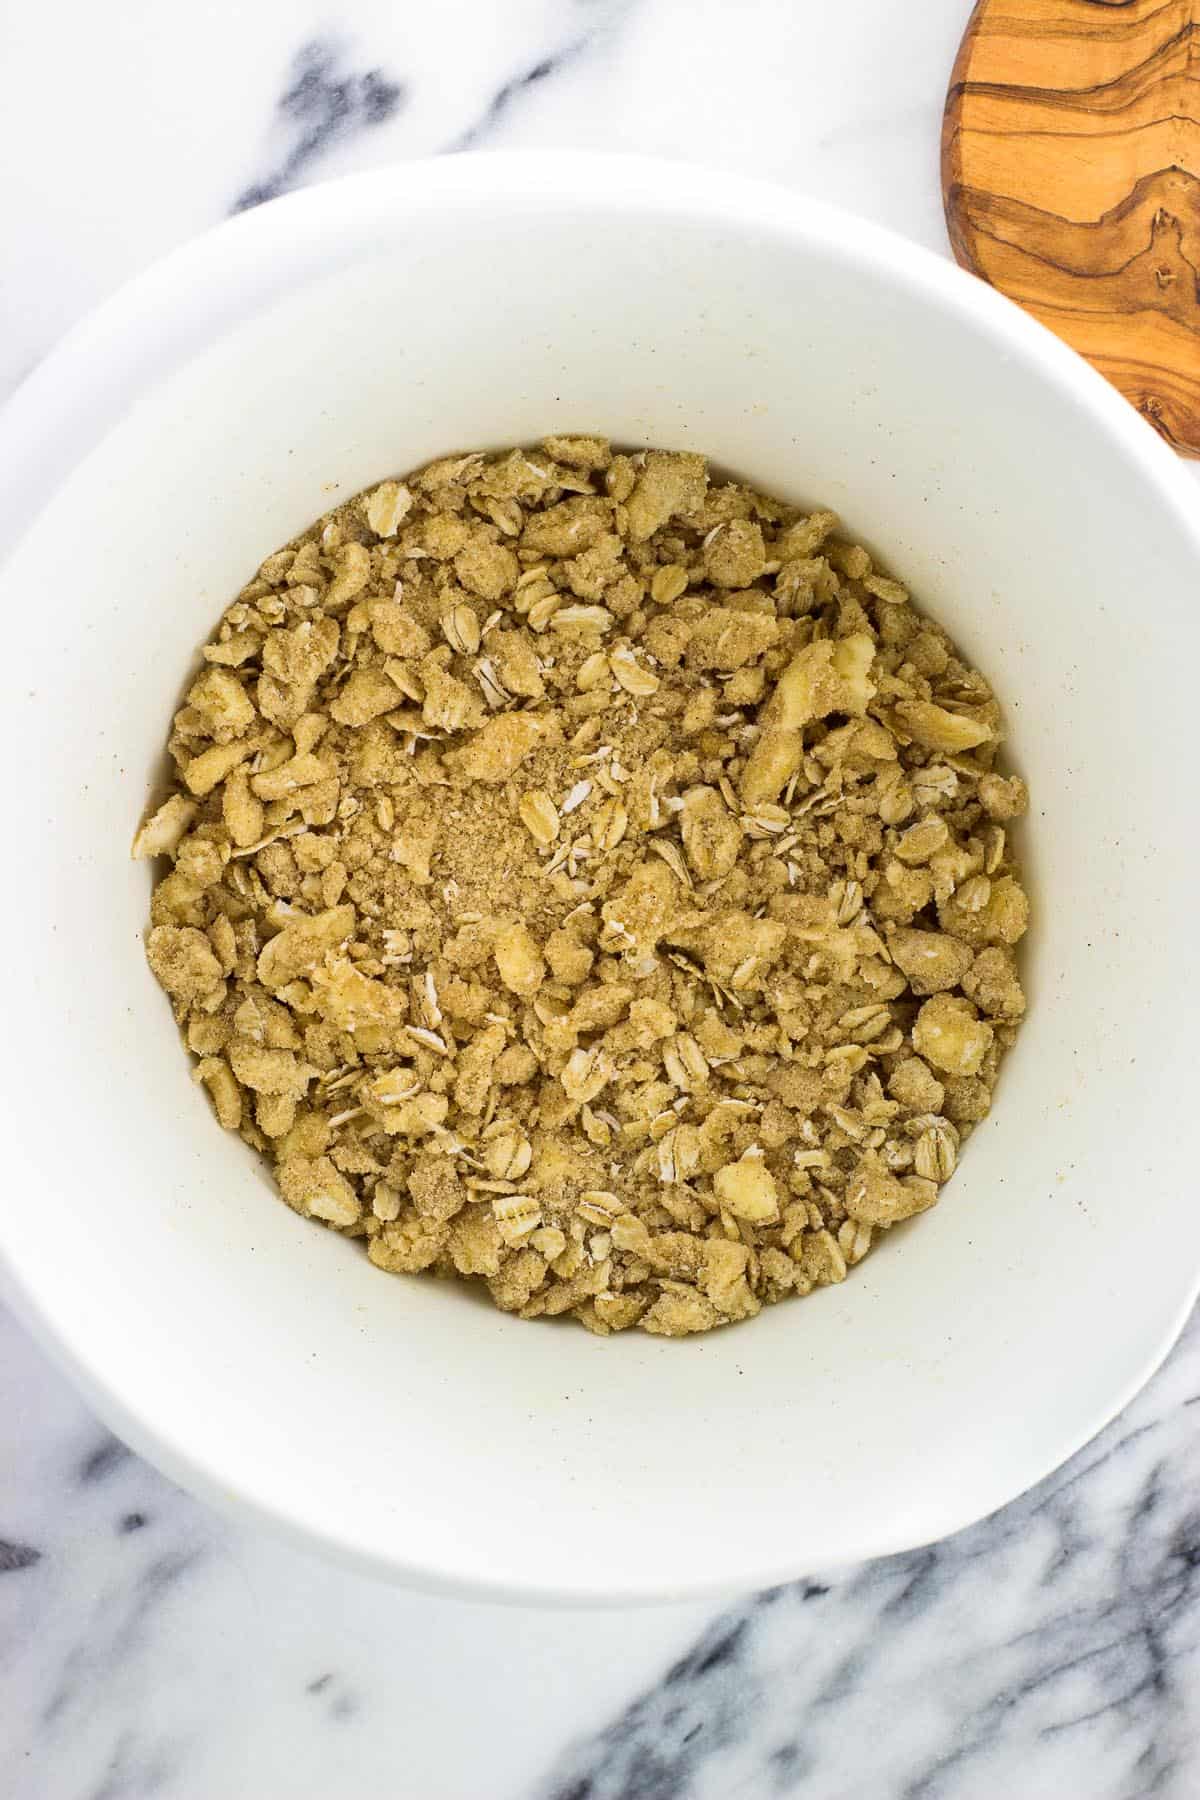 Oatmeal topping in a bowl ready to sprinkle on the fruit.